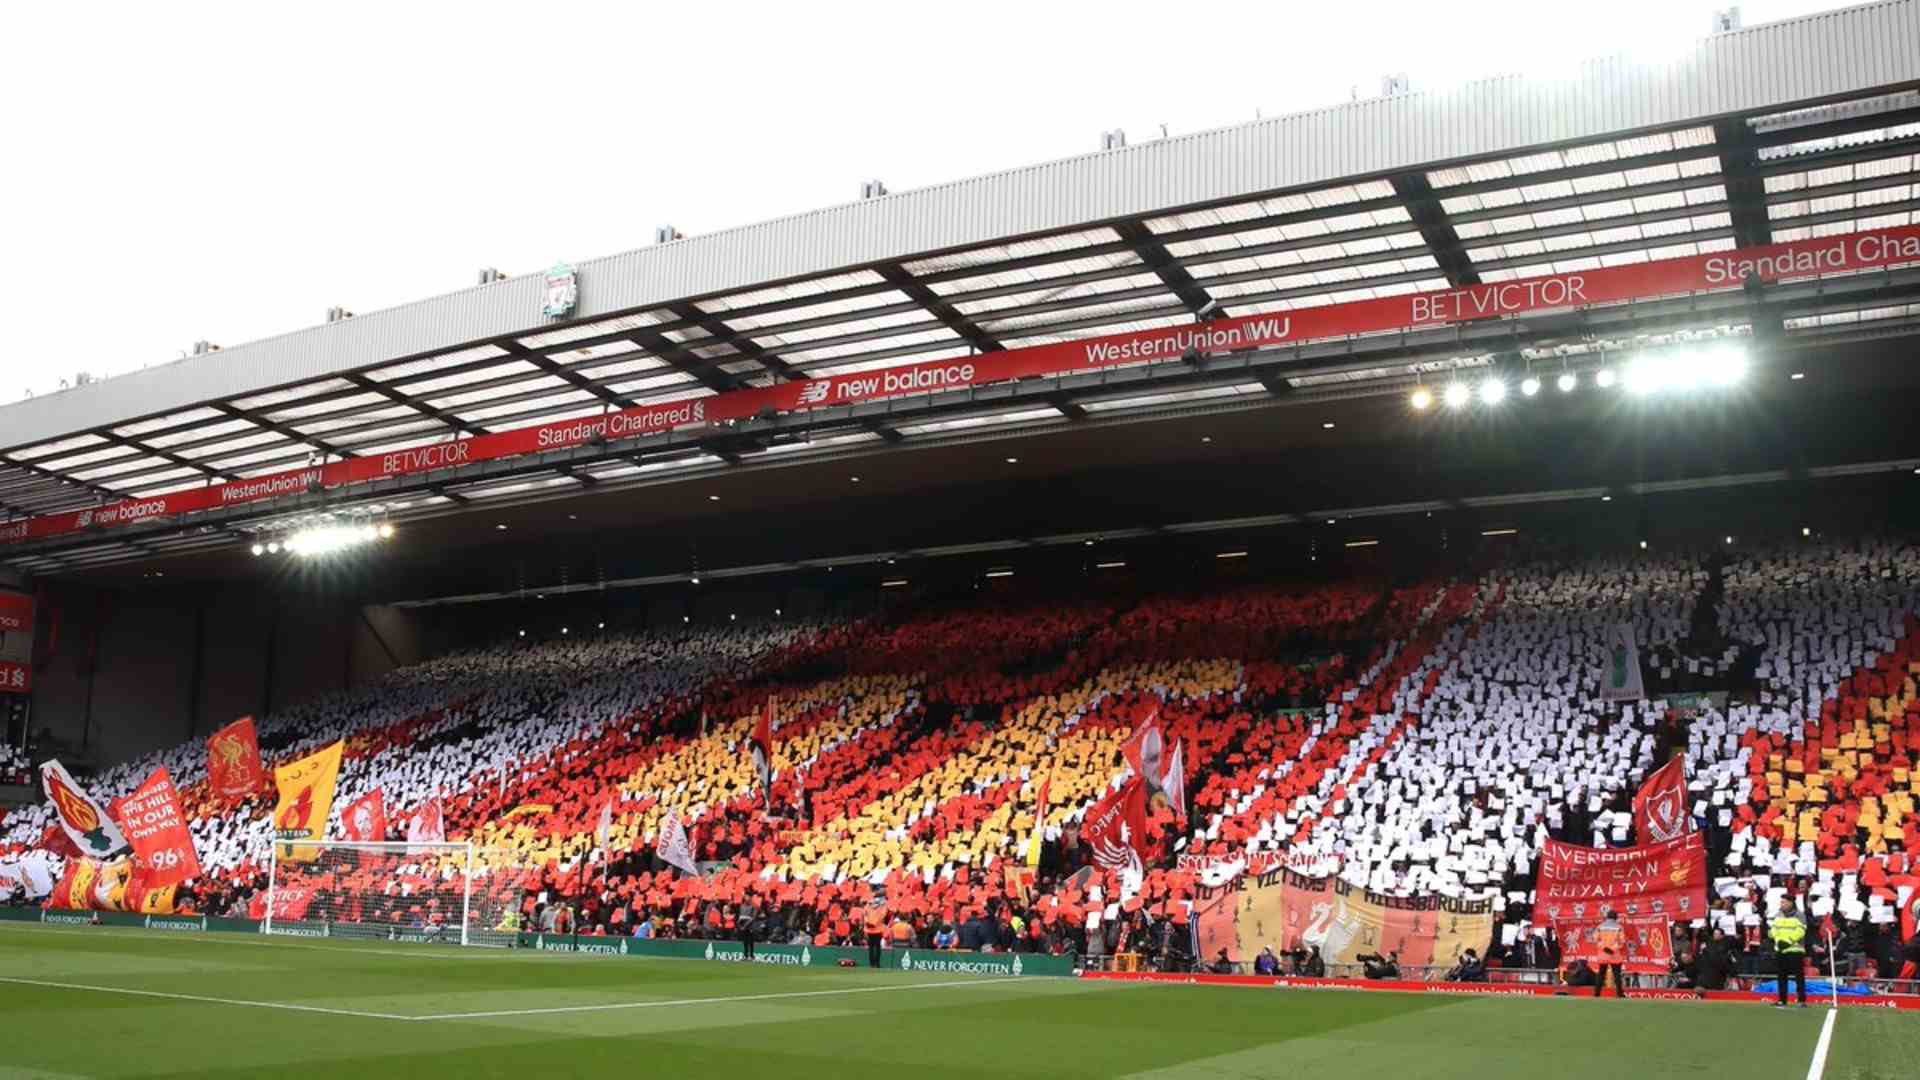 A file photo of Anfield paying tribute to victims of the Hillsborough disaster. (Image: Twitter)